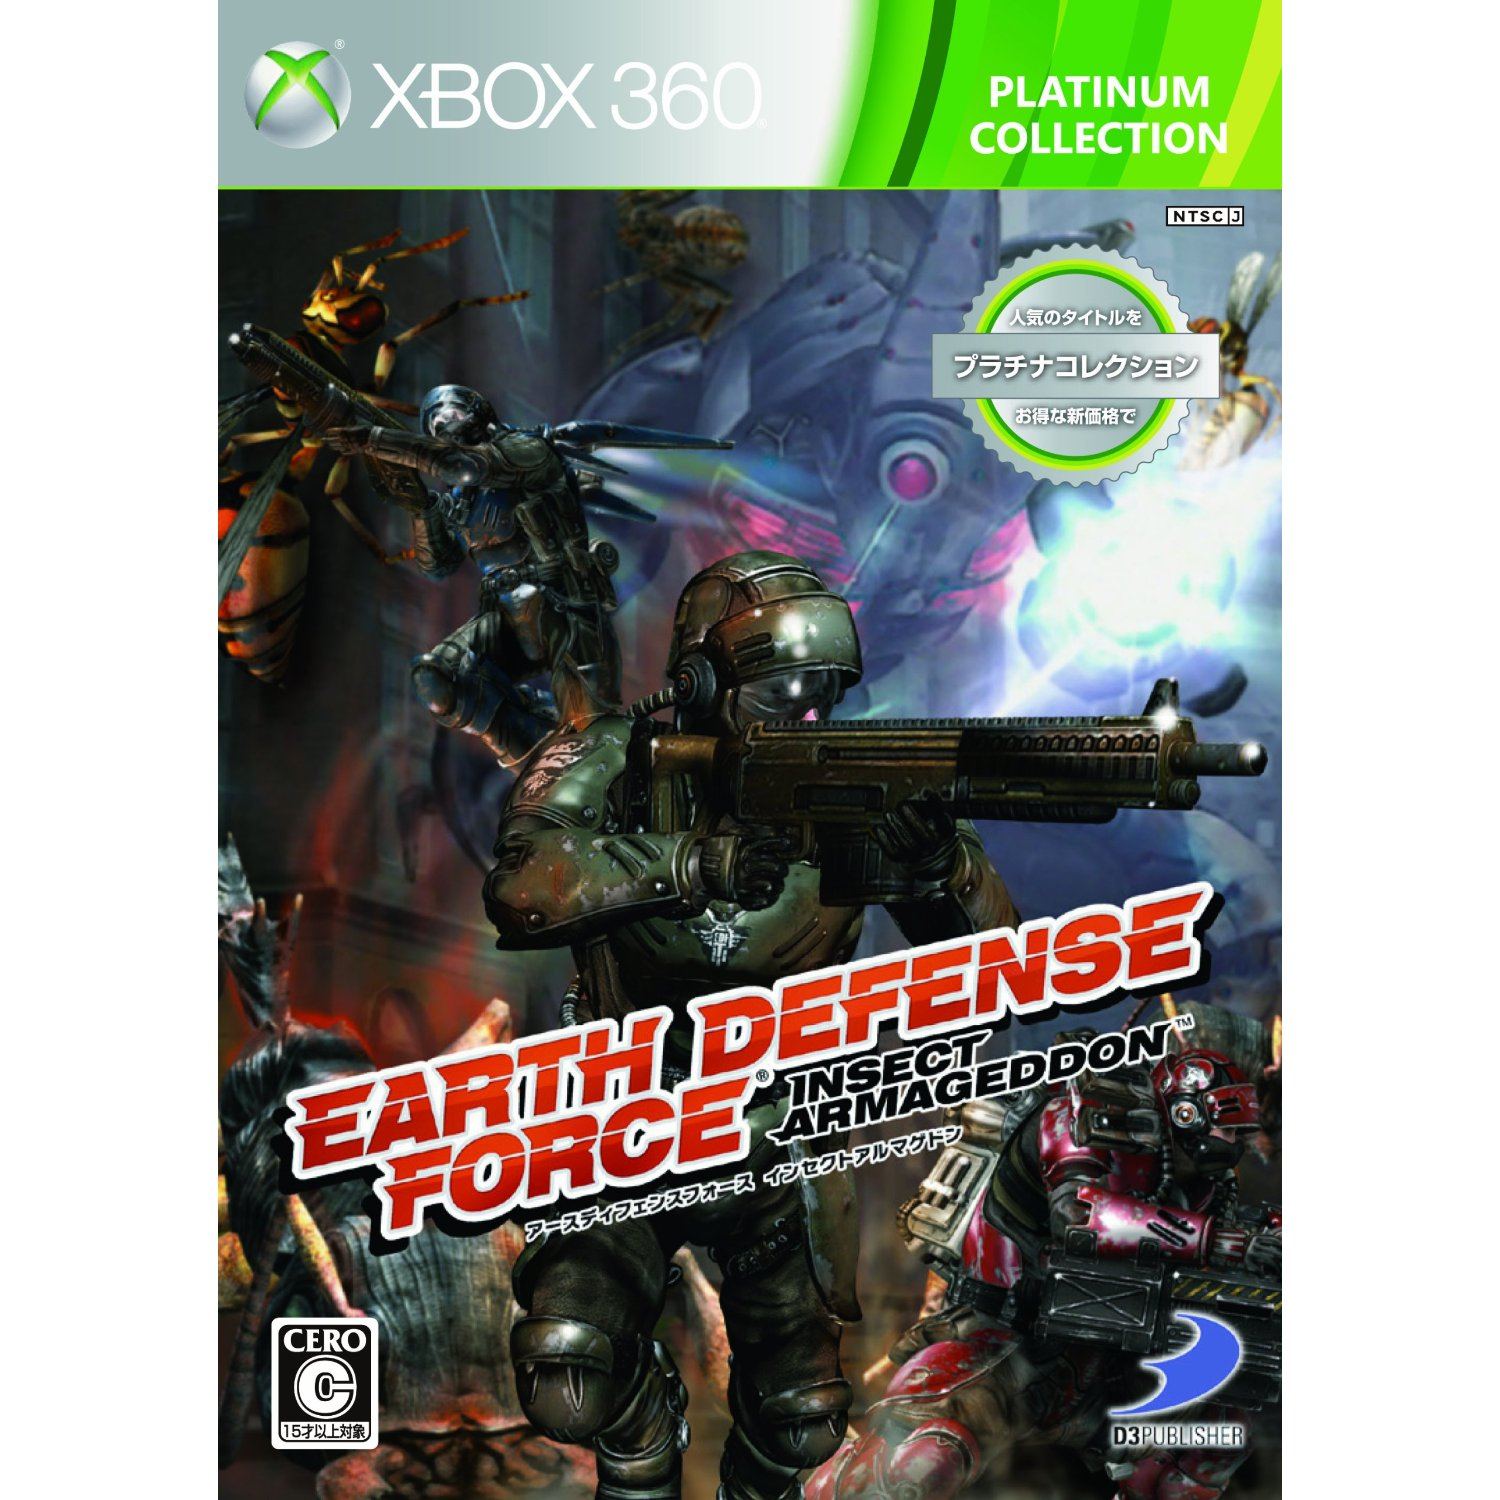 Earth Defense Force Insect Armageddon (Platinum Collection) for Xbox360